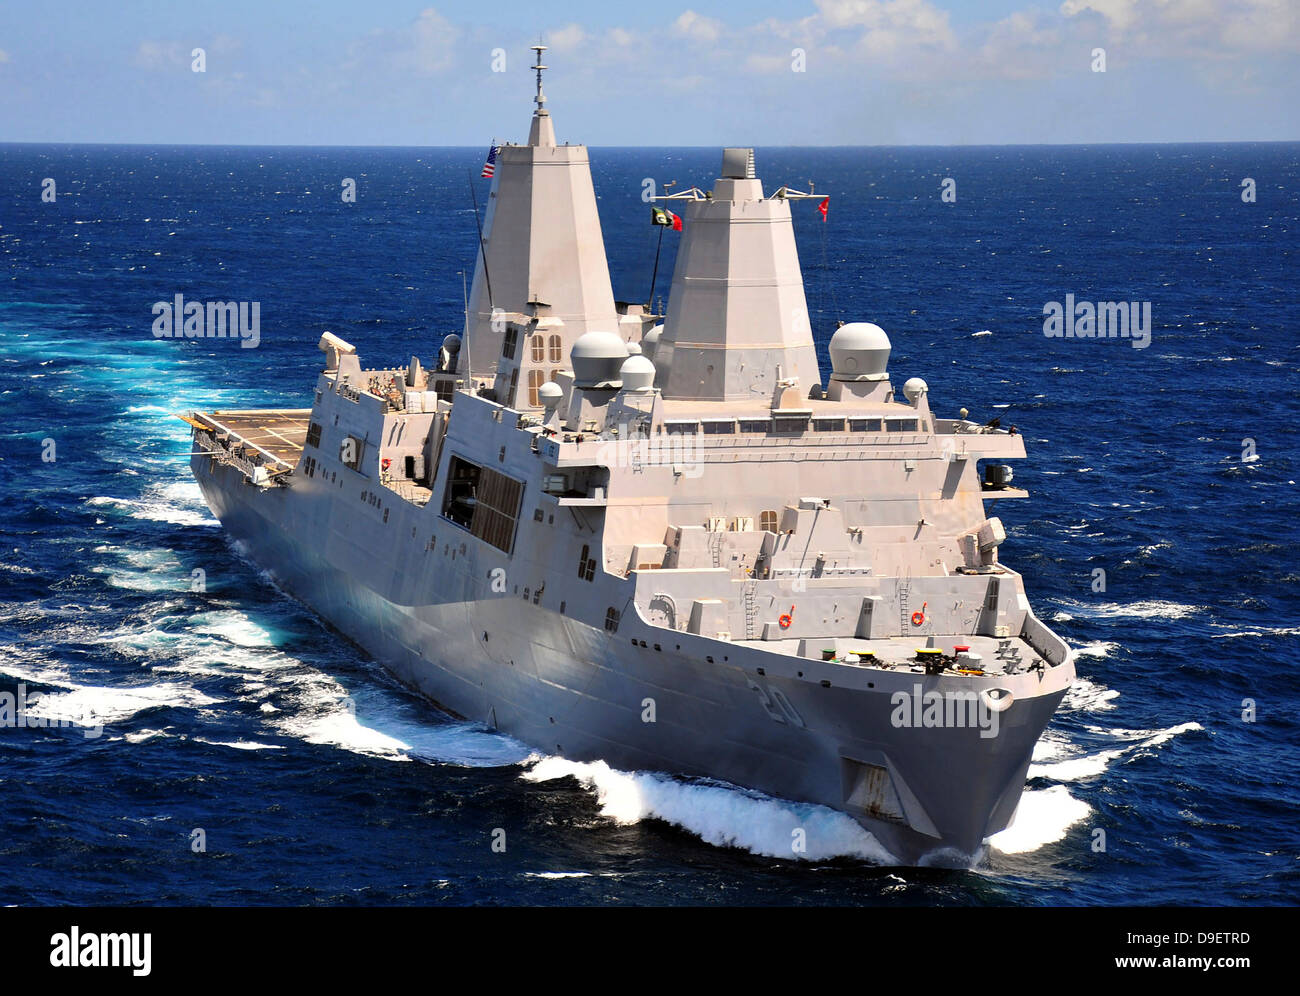 August 18, 2011 - The amphibious transport dock ship USS Green Bay (LPD 20) transits the Indian Ocean. Stock Photo